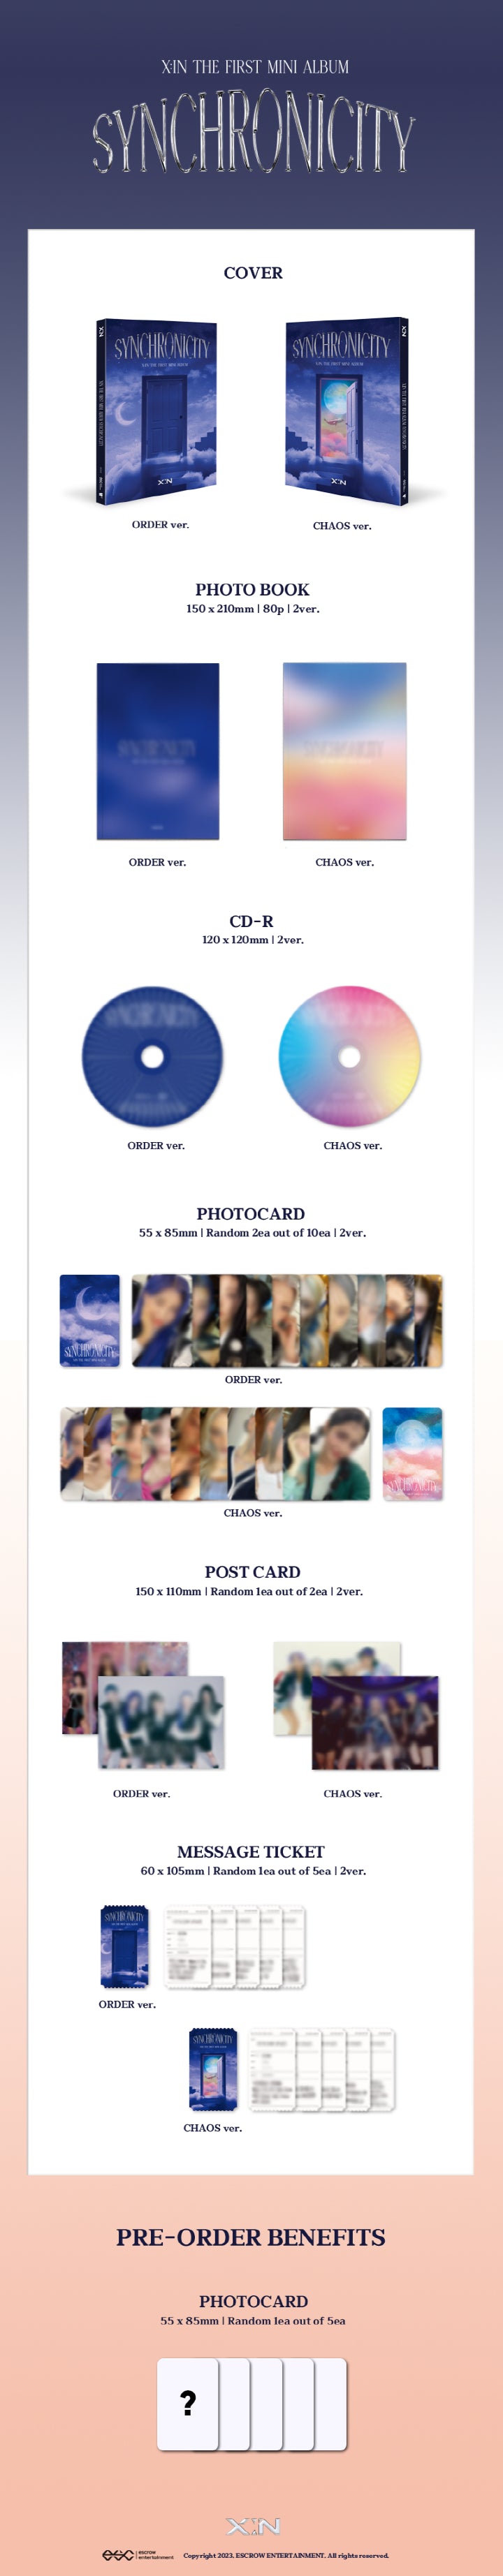 1 CD
1 Photo Book (80 pages)
2 Photo Cards (random out of 10 types)
1 Postcard (random out of 2 types)
1 Message Ticket (r...